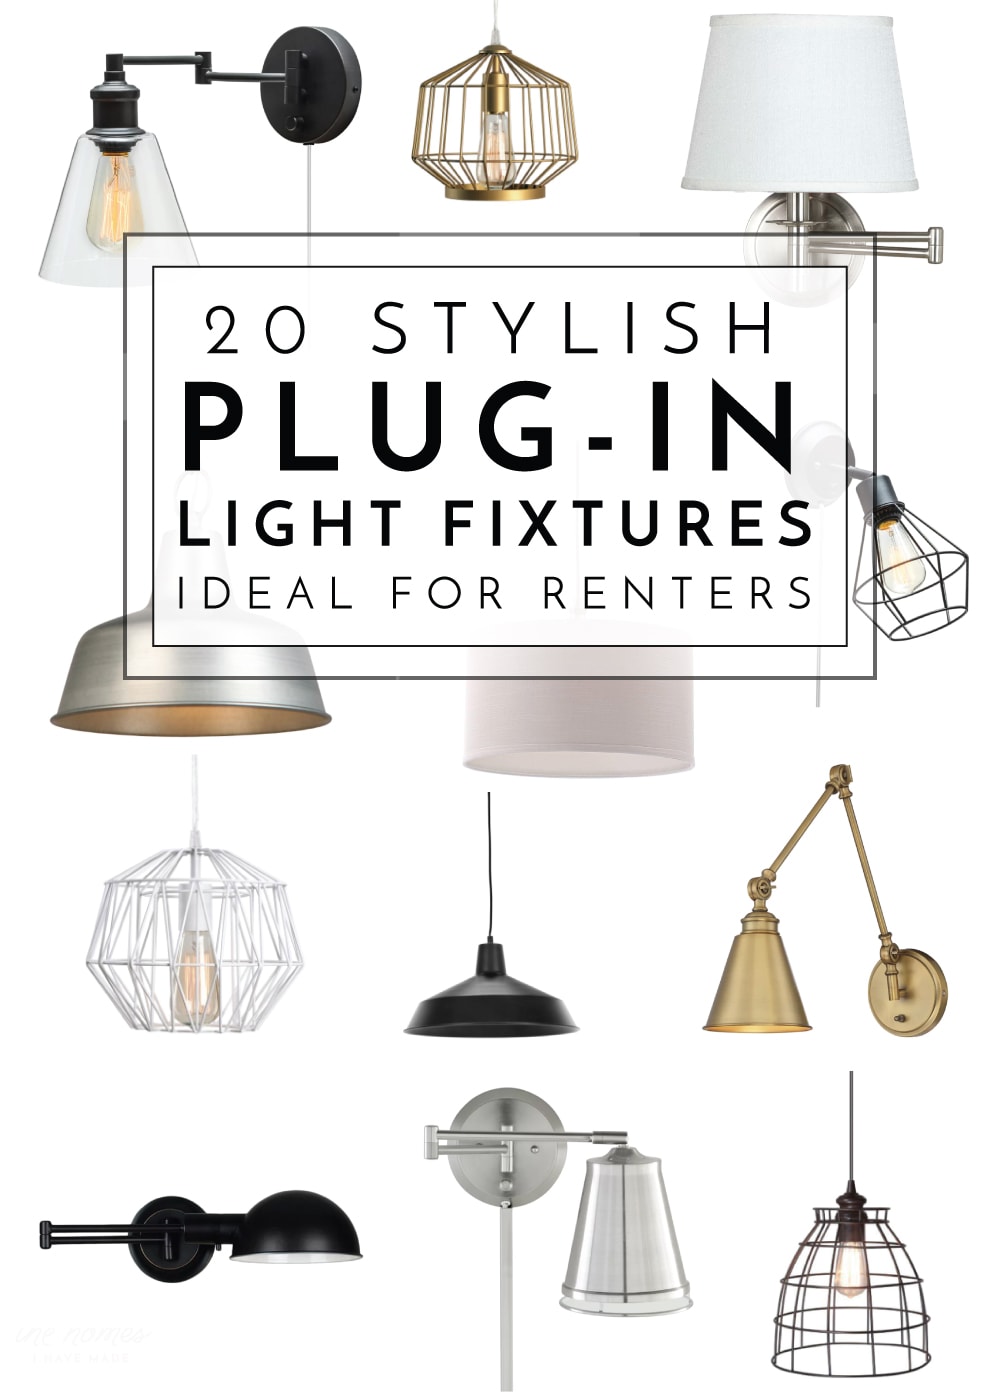 20 Stylish Plug In Light Fixtures Ideal For Renters The Homes I